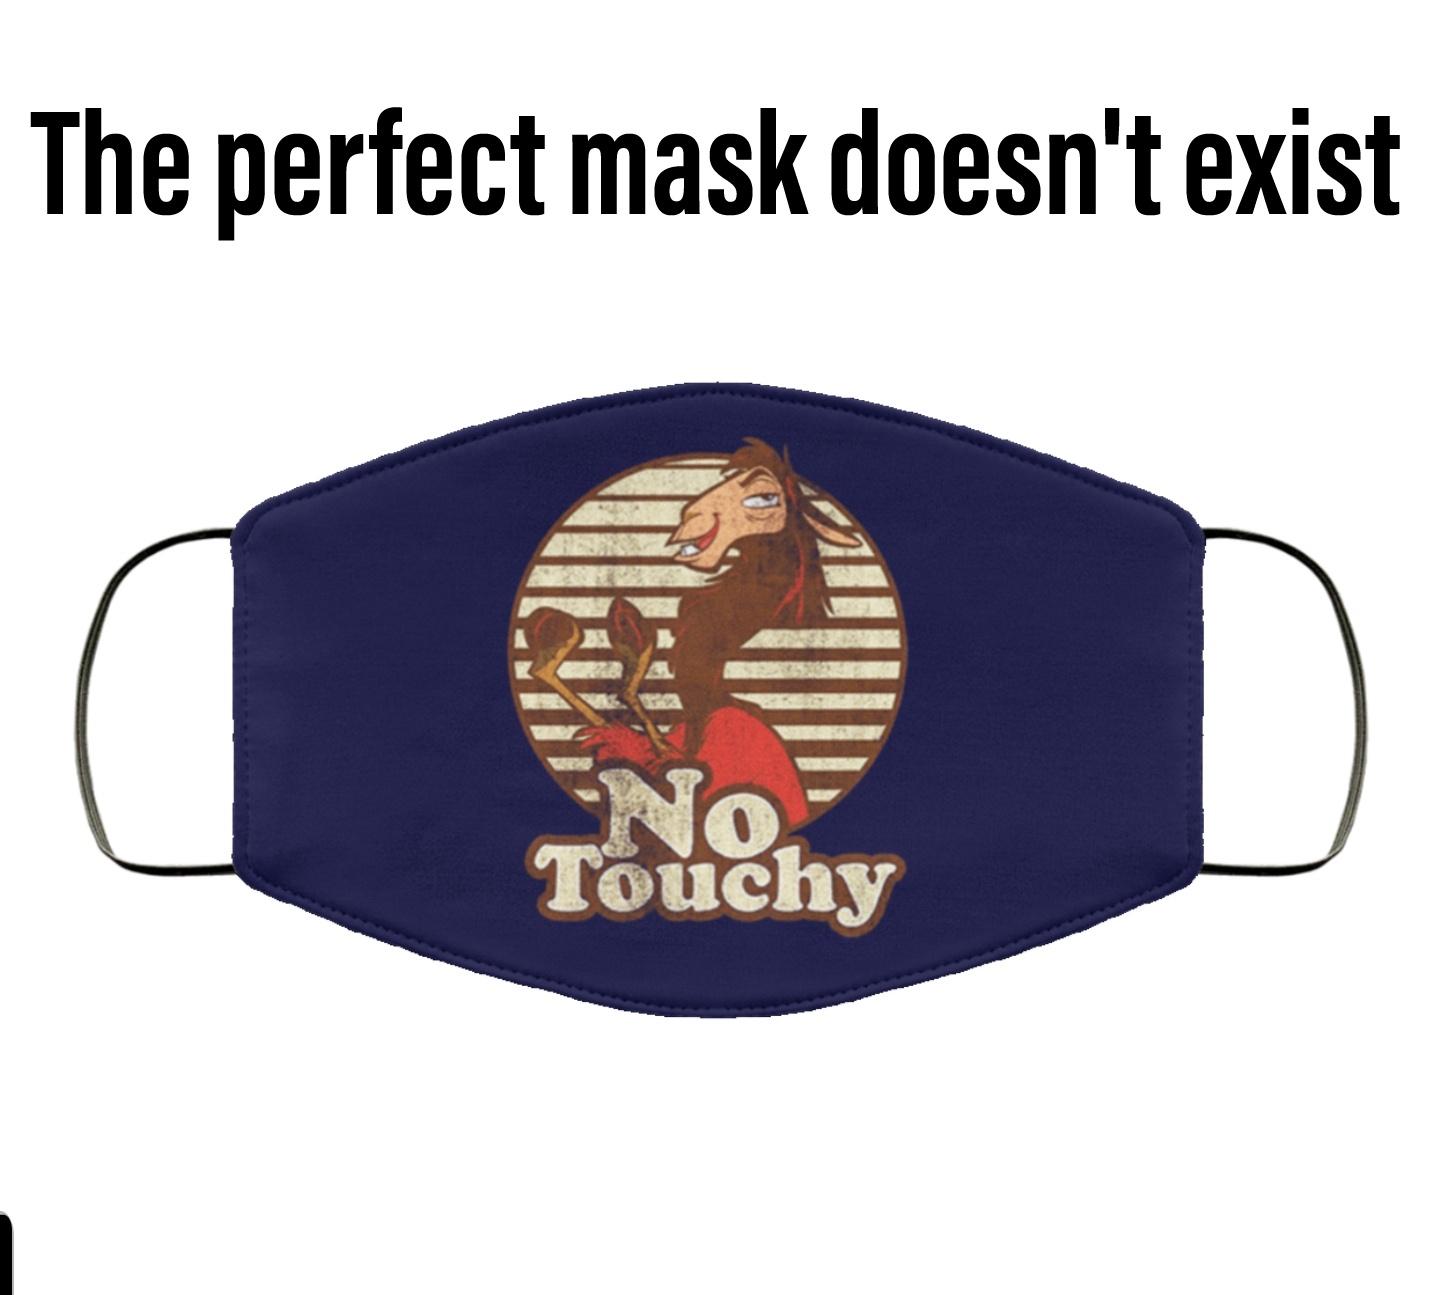 The perfect mask doesn't exist No Touchy